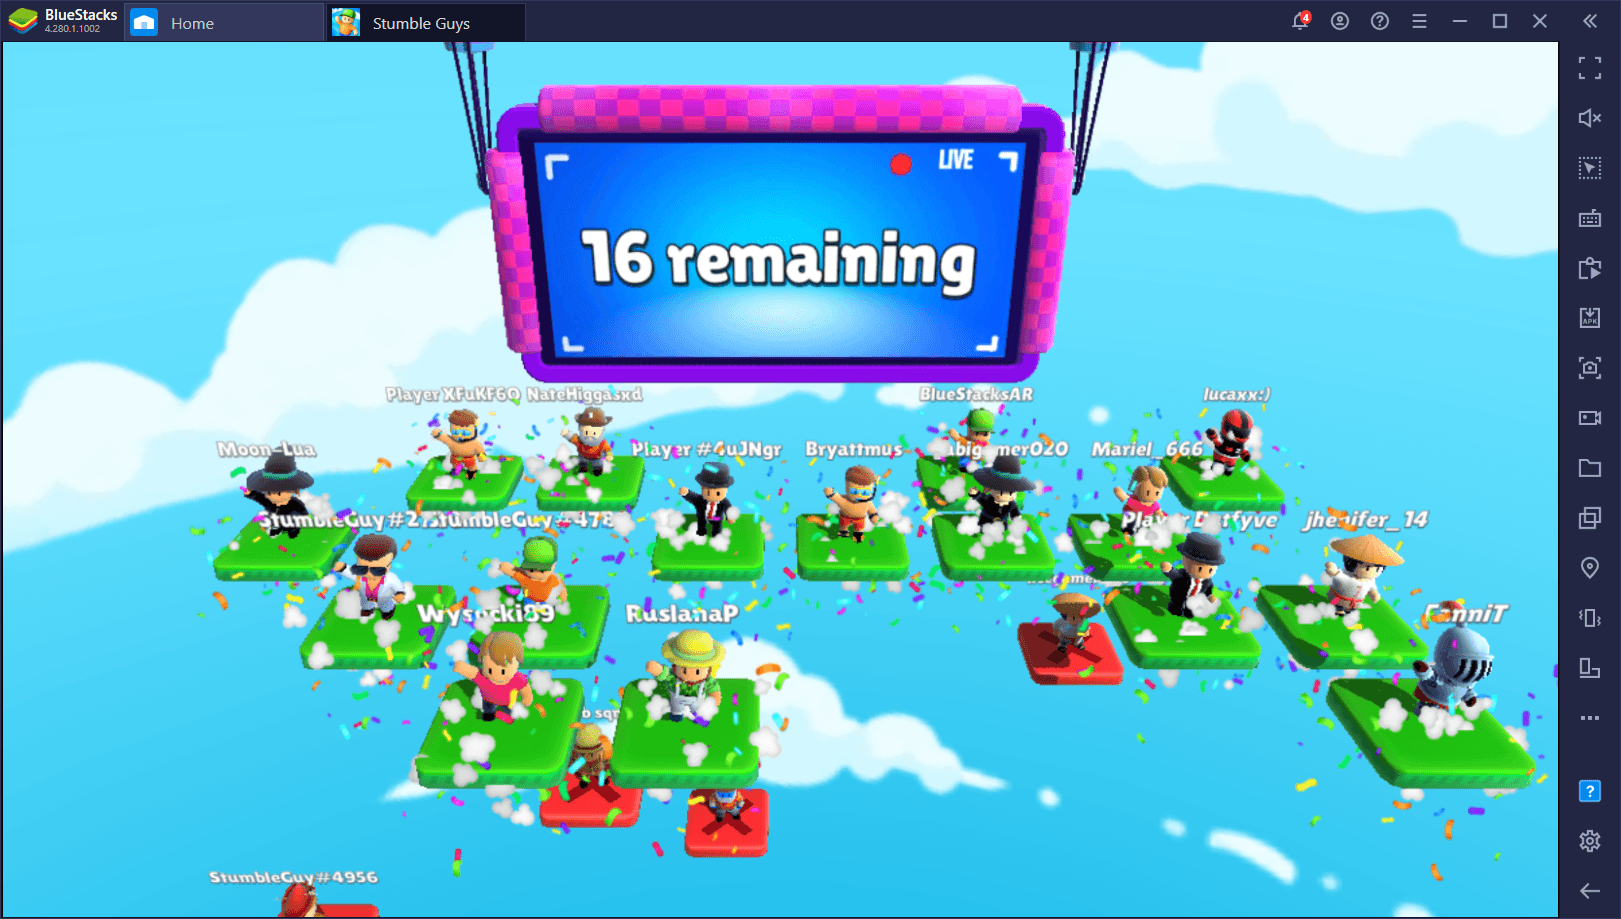 How to Install and Play Stumble Guys on PC with BlueStacks